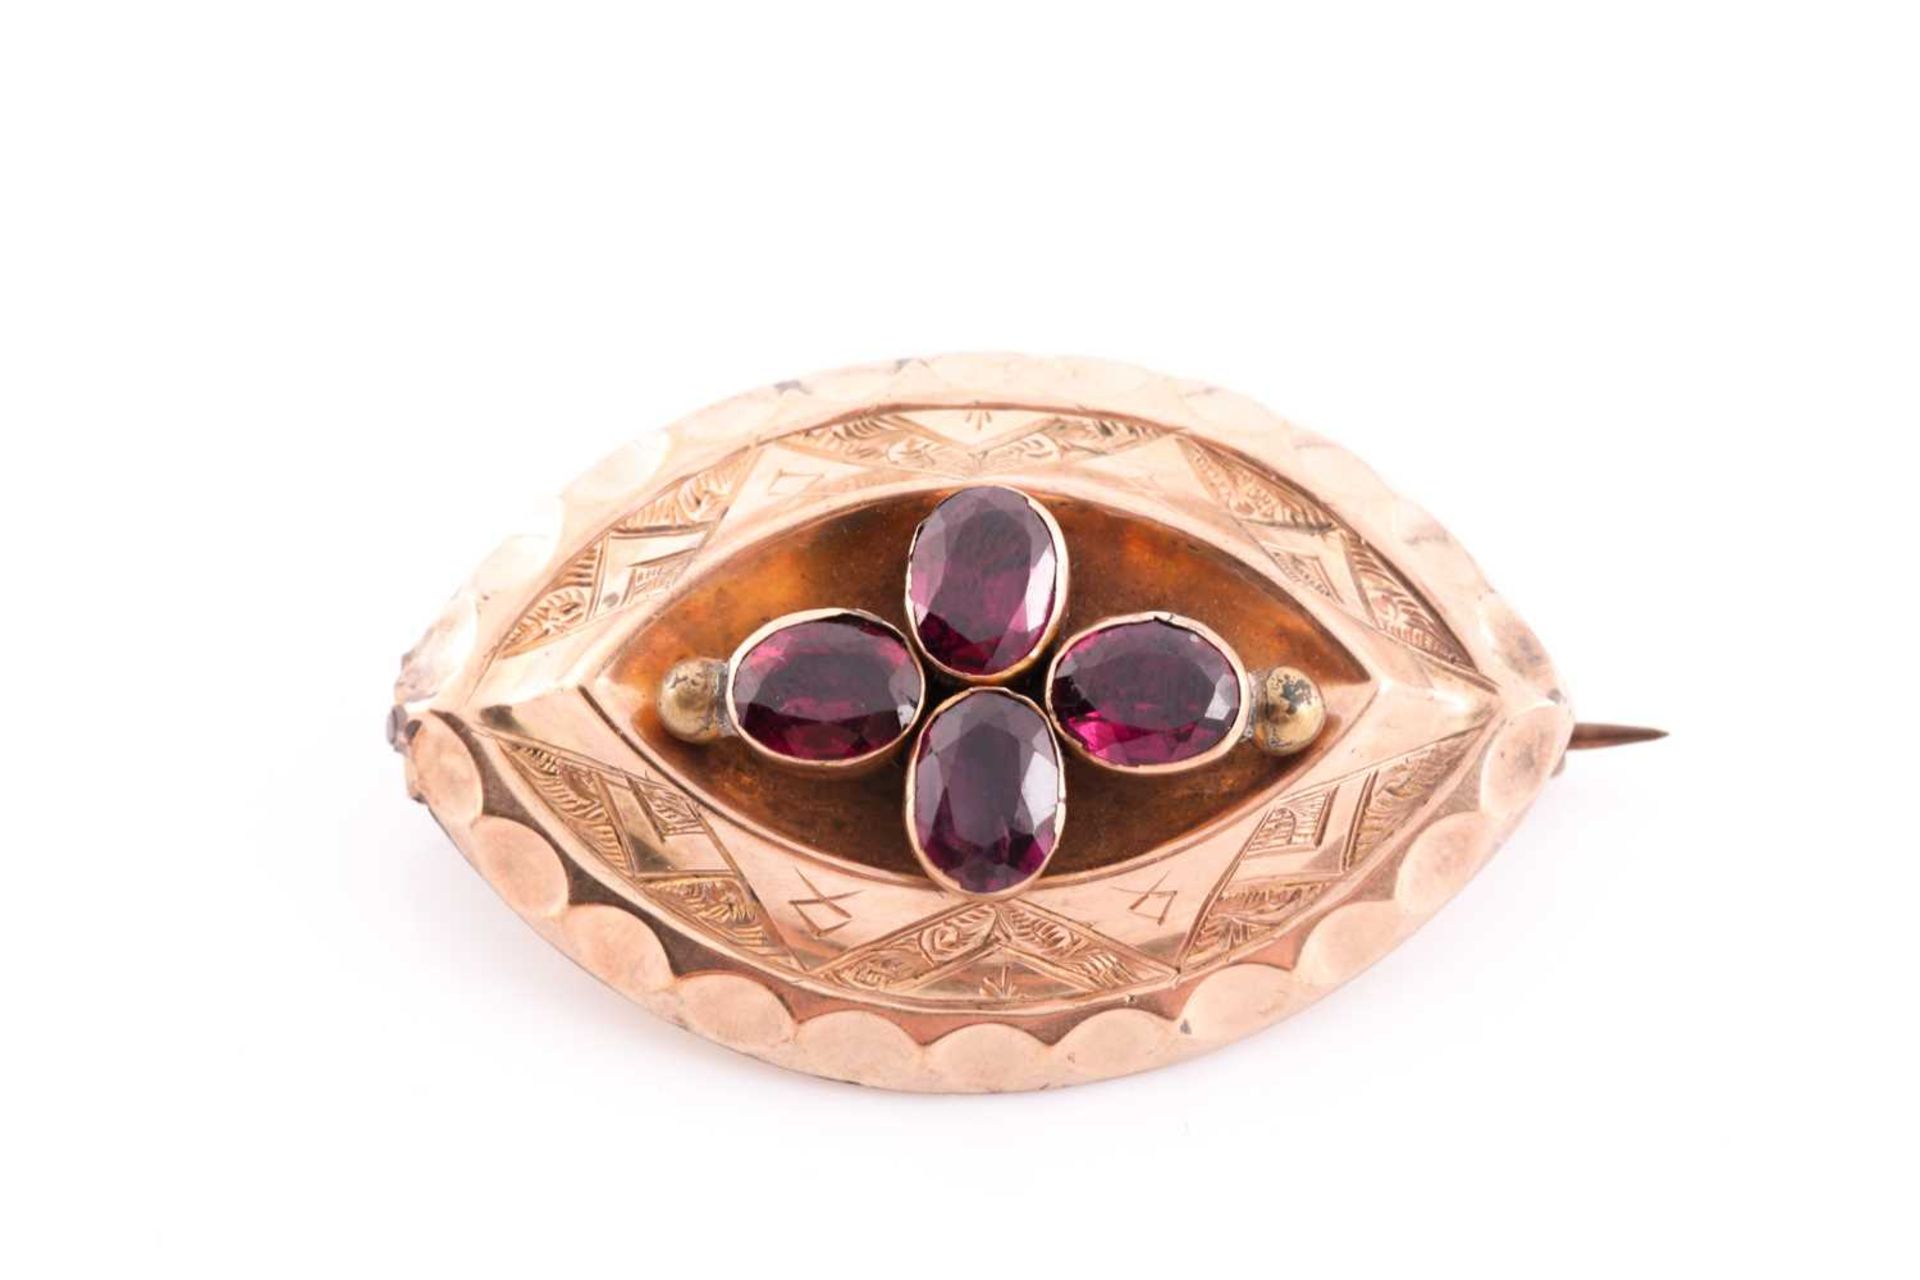 A Victorian yellow gold and garnet brooch, set with four mixed oval-cut garnets, with vacant glass